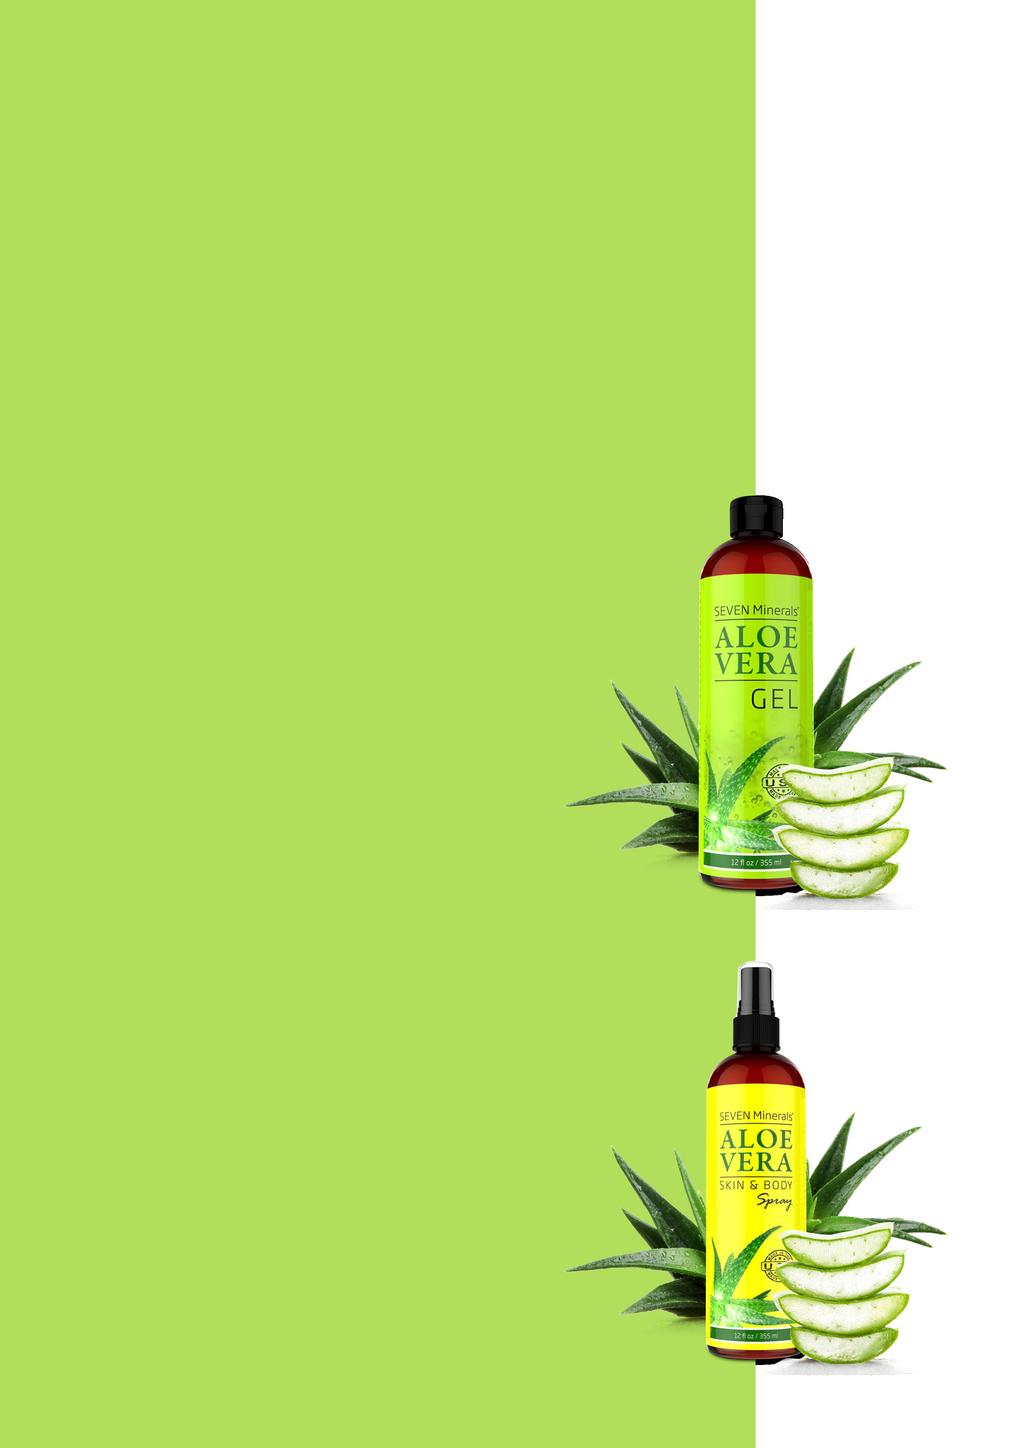 SEVEN MINERALS ALOE VERA Seven Minerals Aloe Vera Gel Seven Minerals Aloe Vera Gel is a clear, slightly thinner gel. Every bottle of our Aloe Vera Gel contains 99% of Certified Organic Aloe Vera.